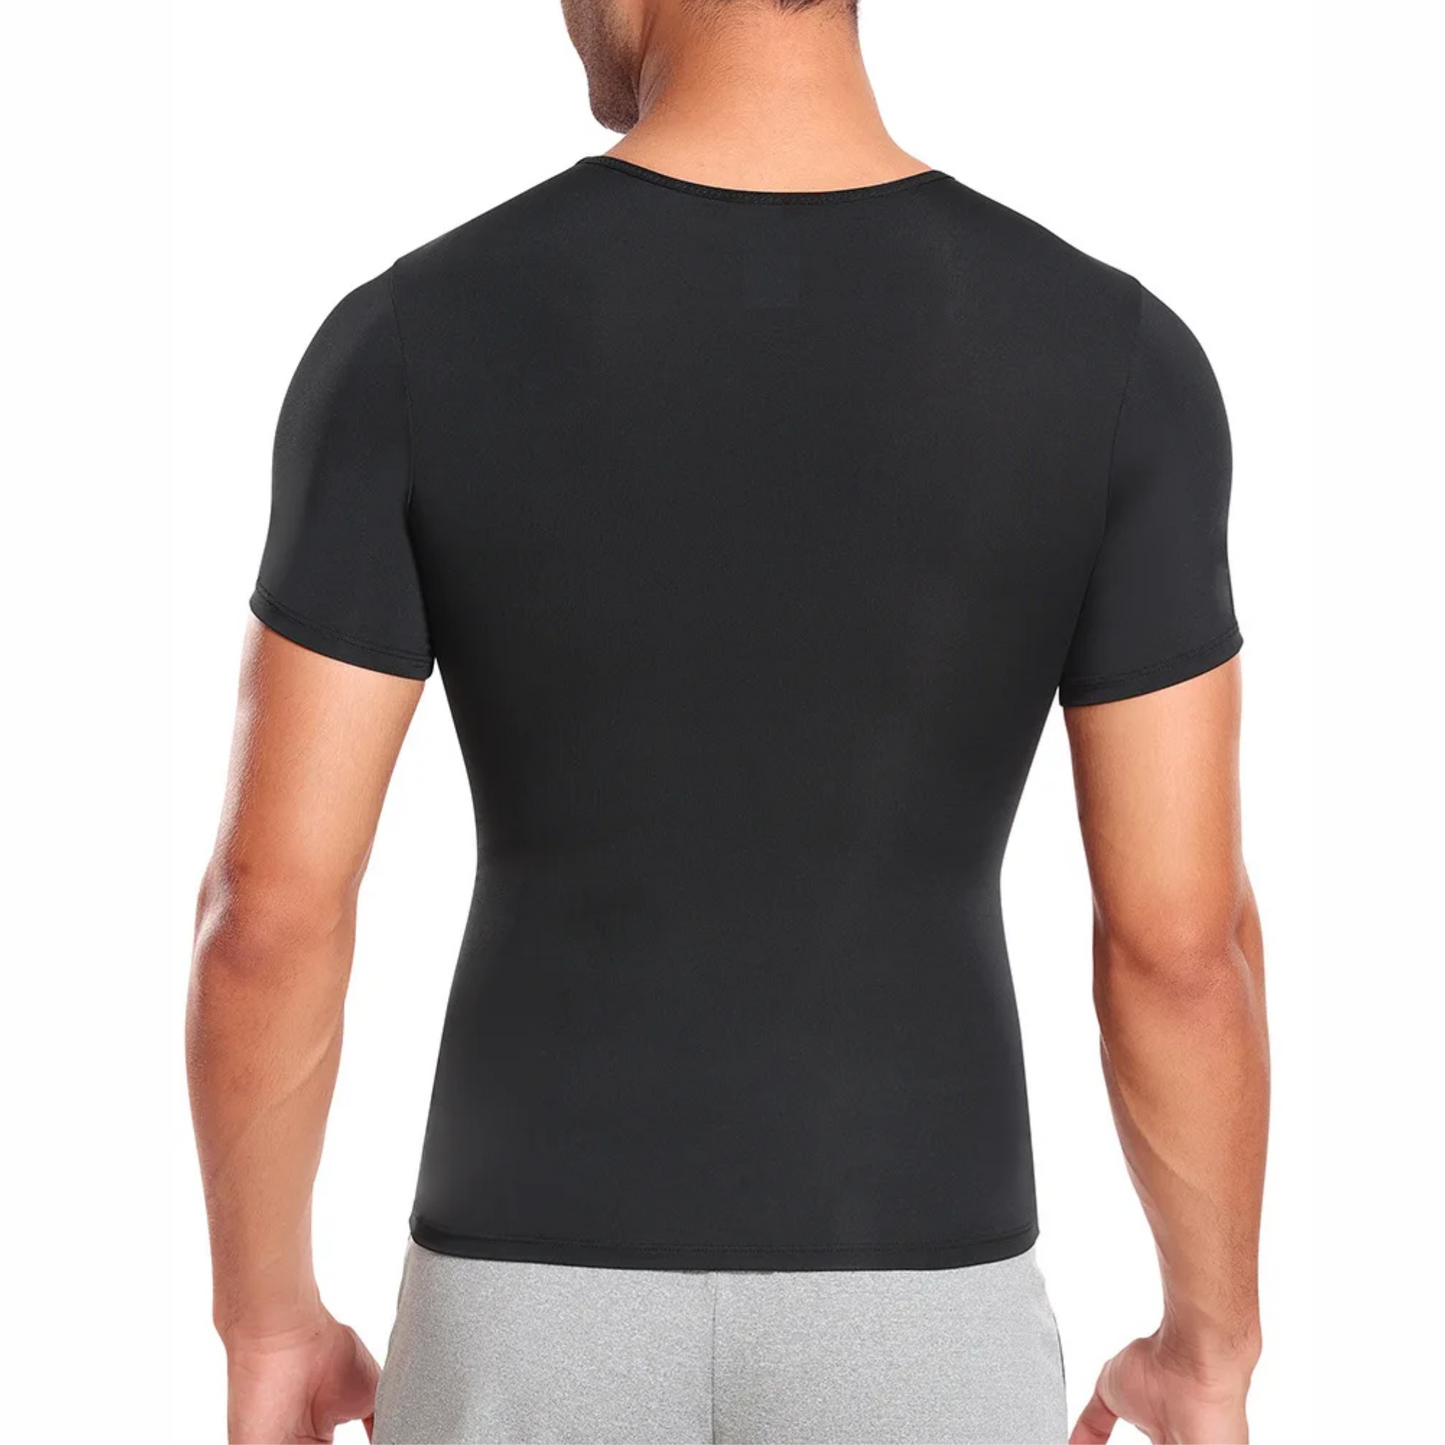 T Shirt Shaper With Built In Waist Trainer